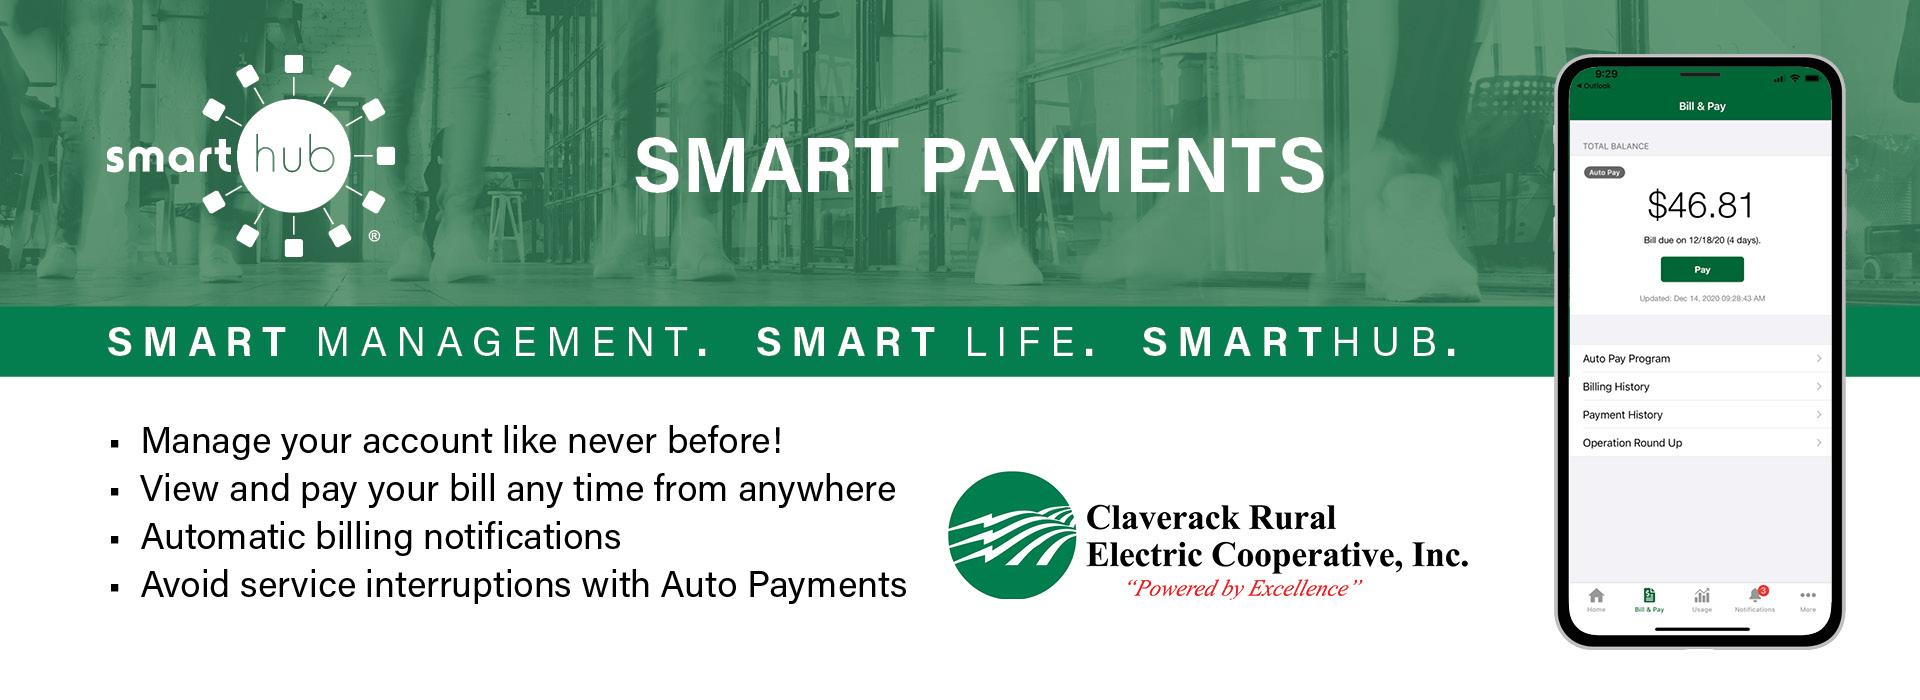 SmartHub means smart payments